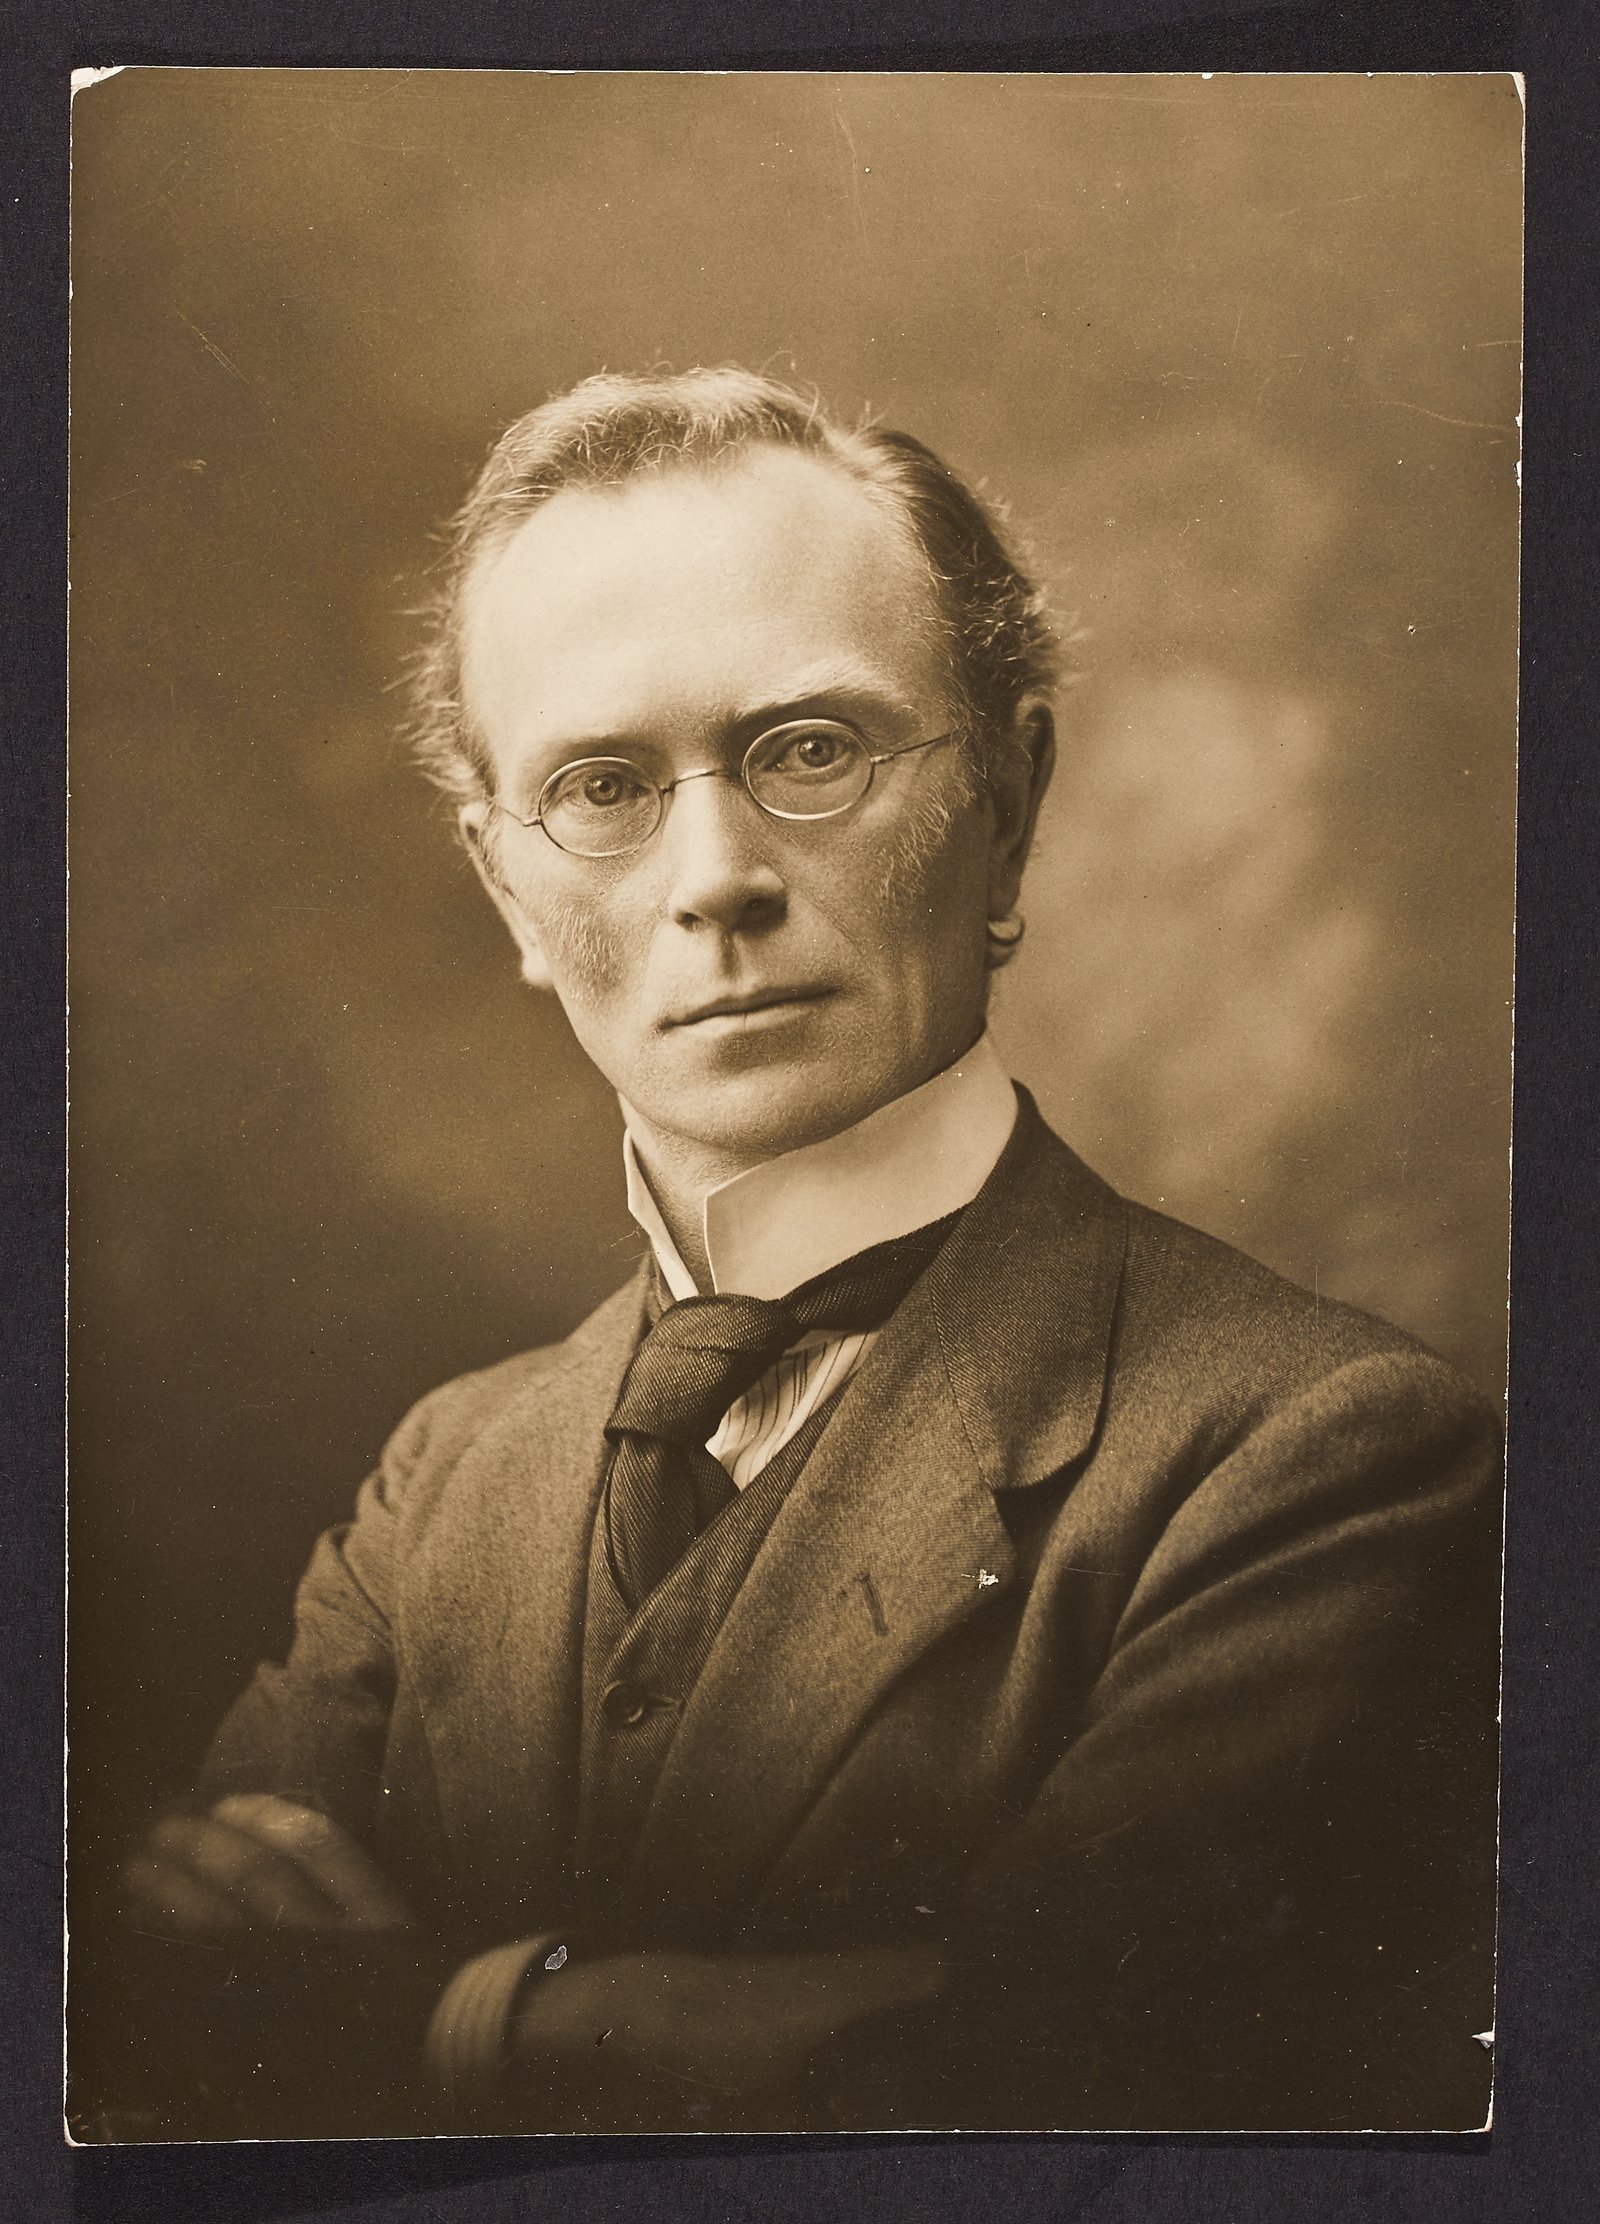 Image - Eoin MacNeill, Ceann Comhairle : 'The result of the poll is sixty-four for approval and fifty-seven against. That is a majority of seven in favour of approval of the Treaty'. Credit: National Library of Ireland